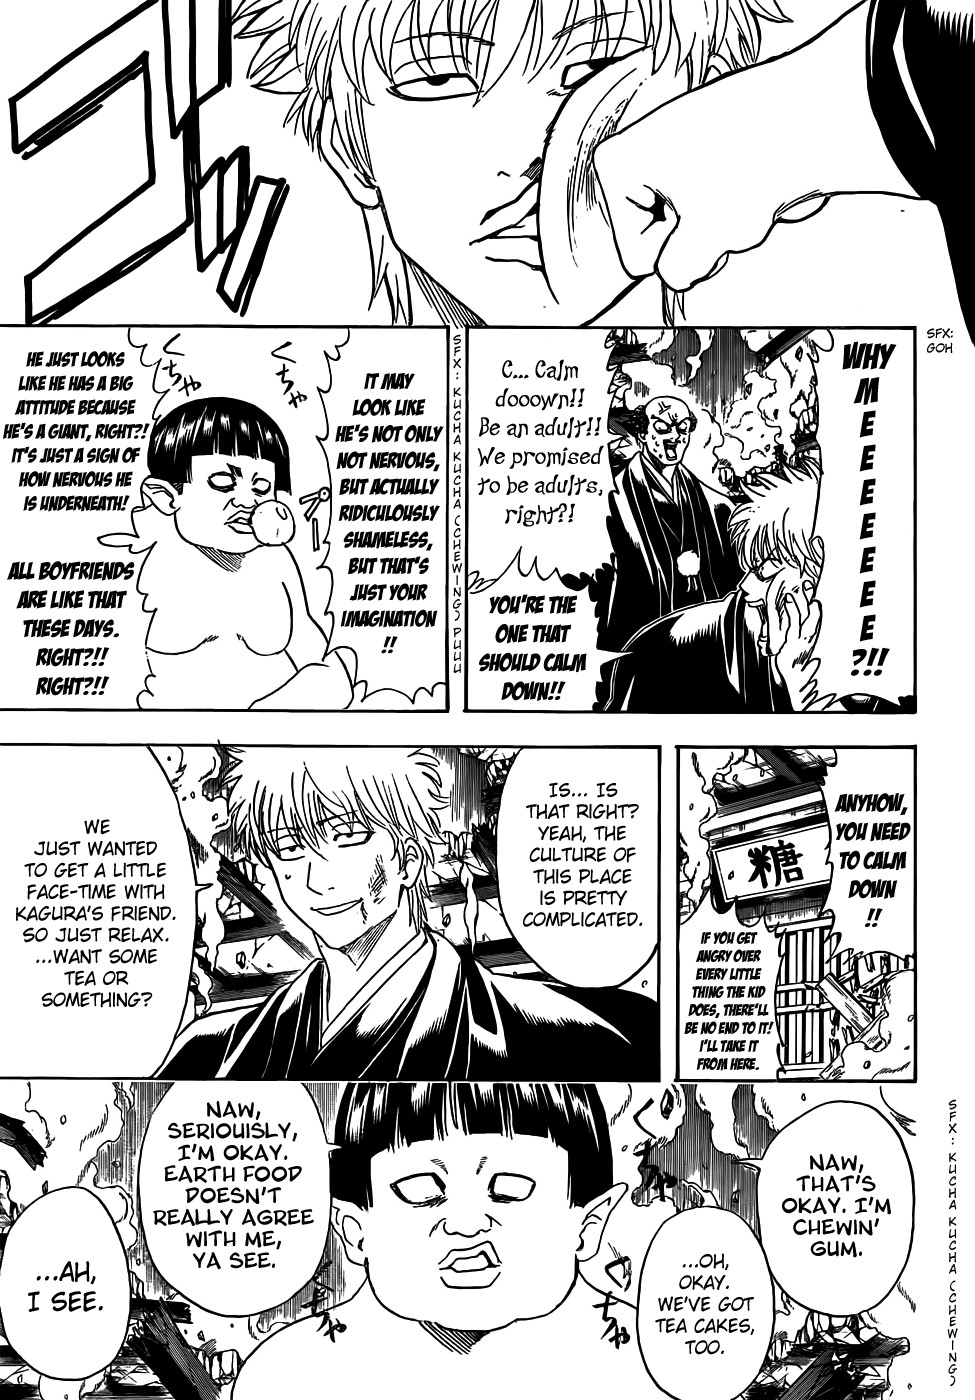 Gintama chapter 421 page 2